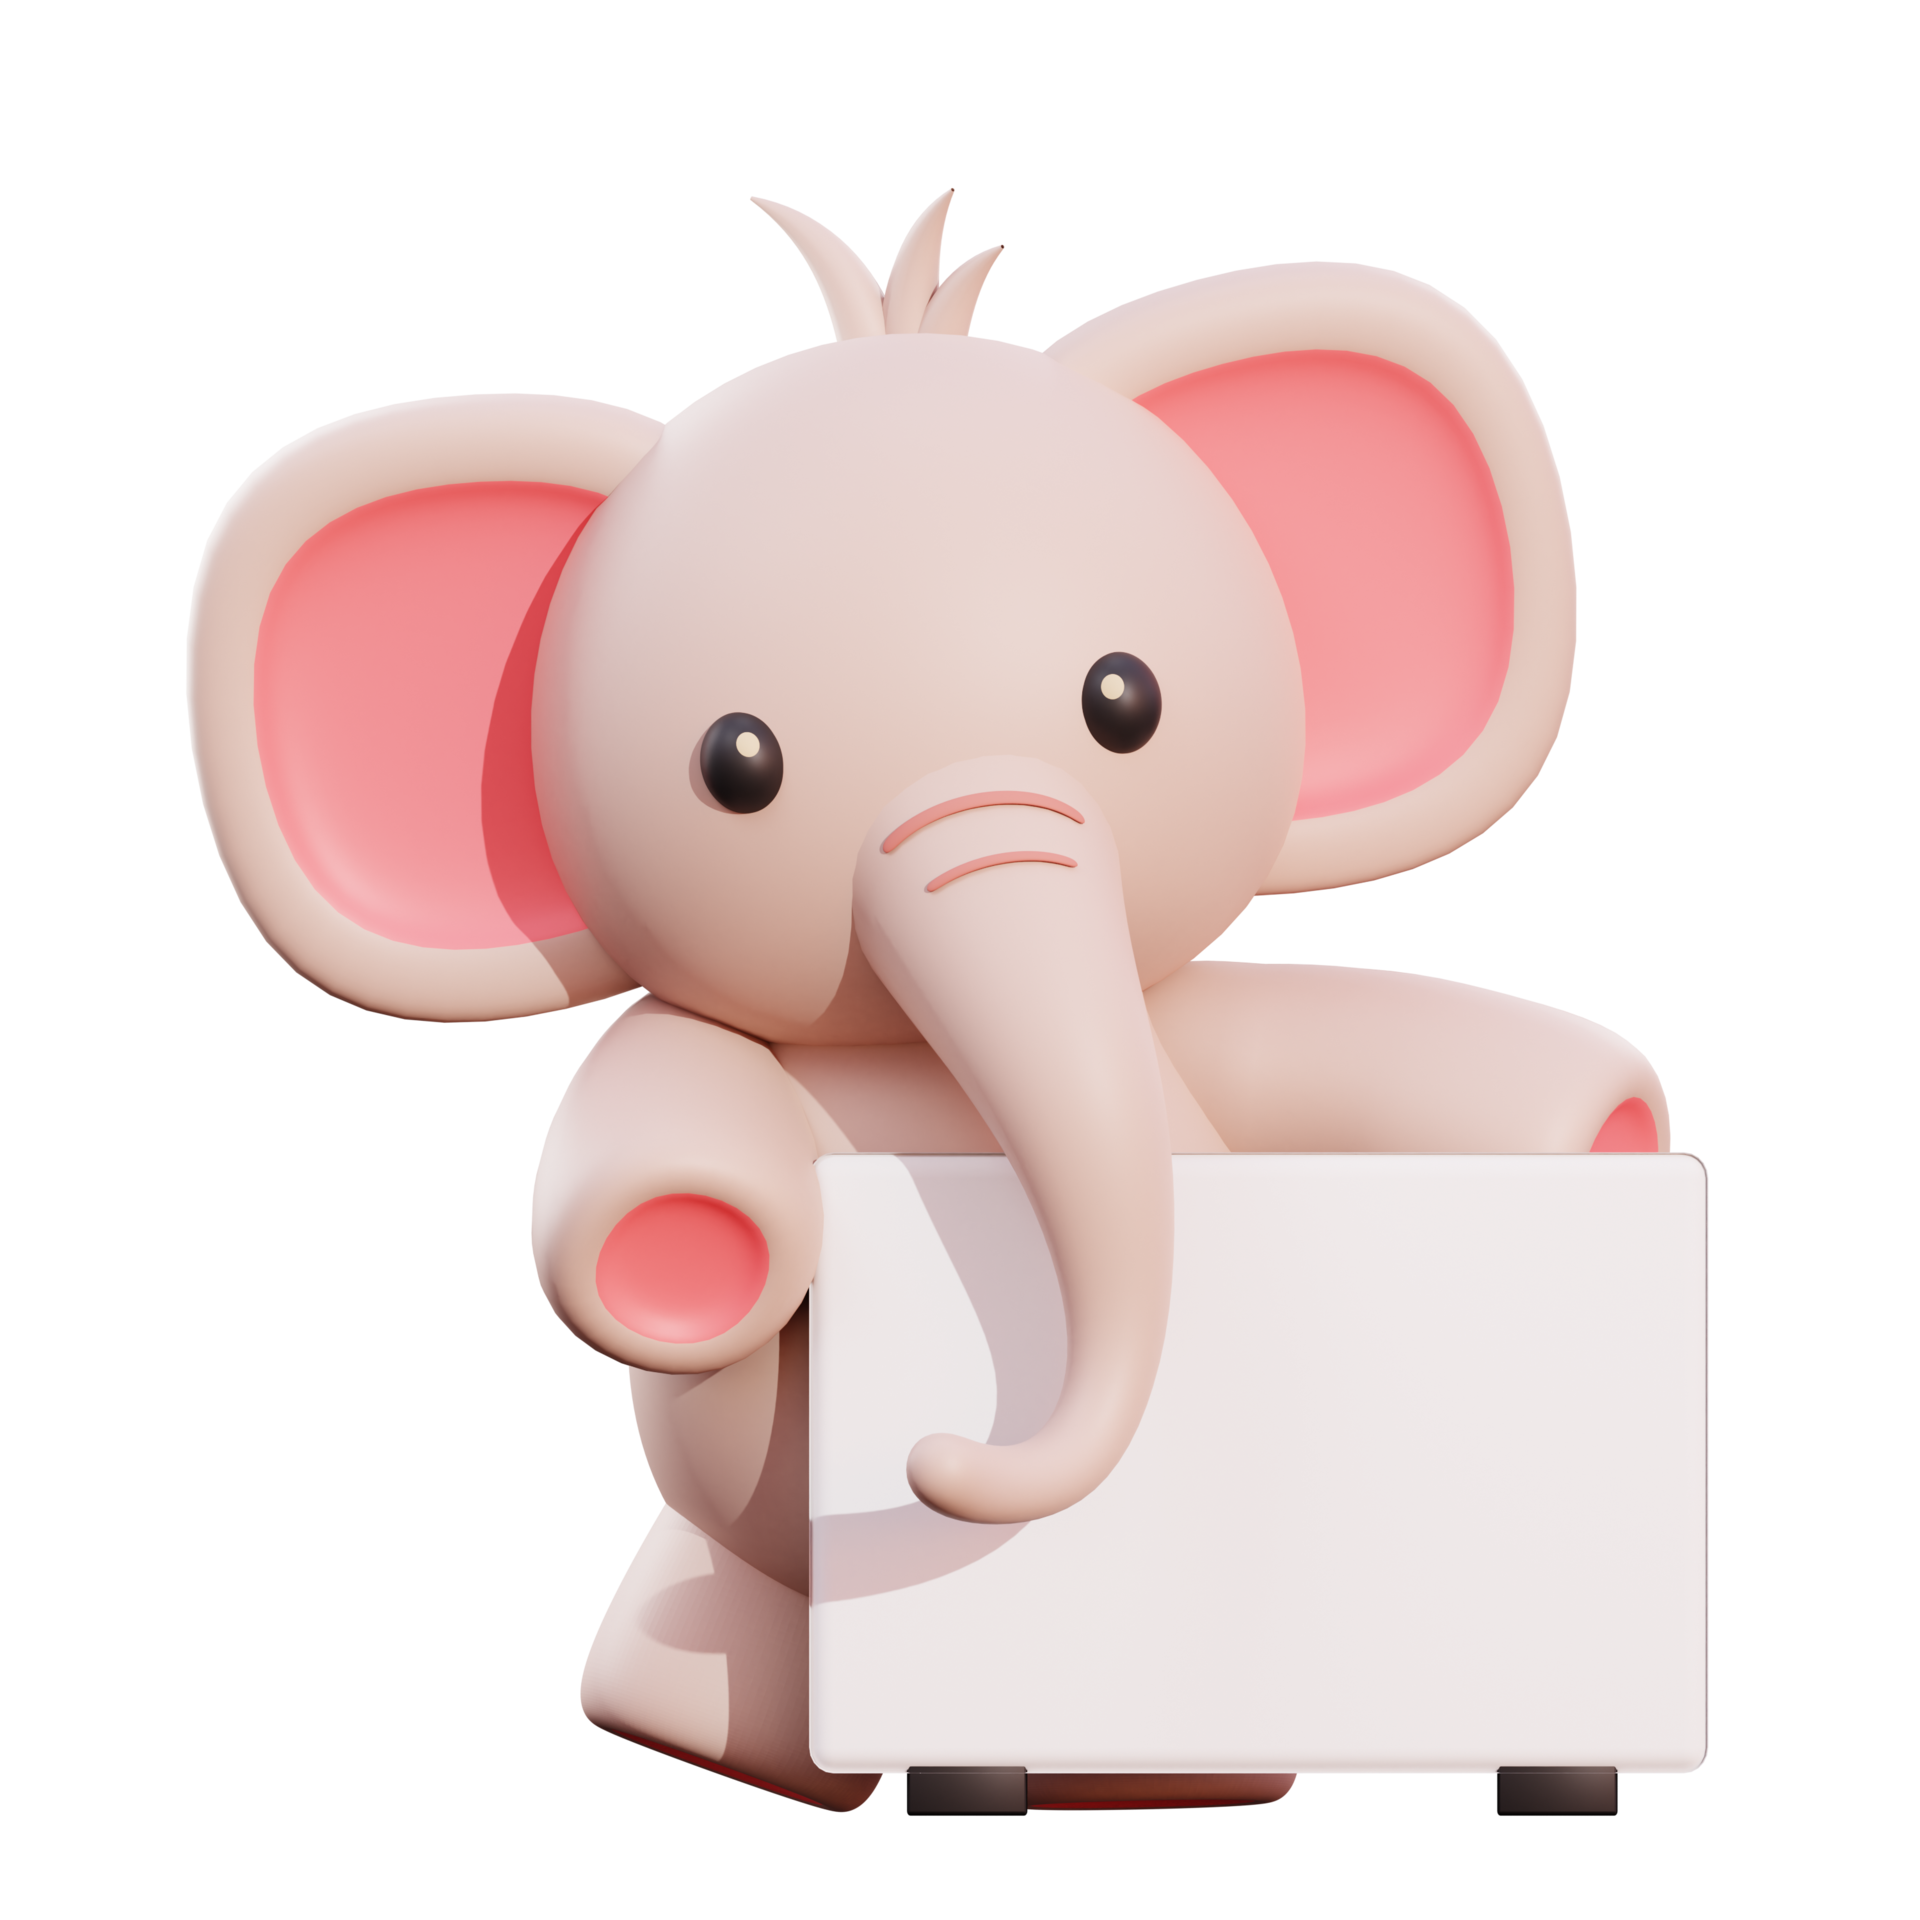 Free Cute elephant 3d illustration 9269786 PNG with Transparent Background